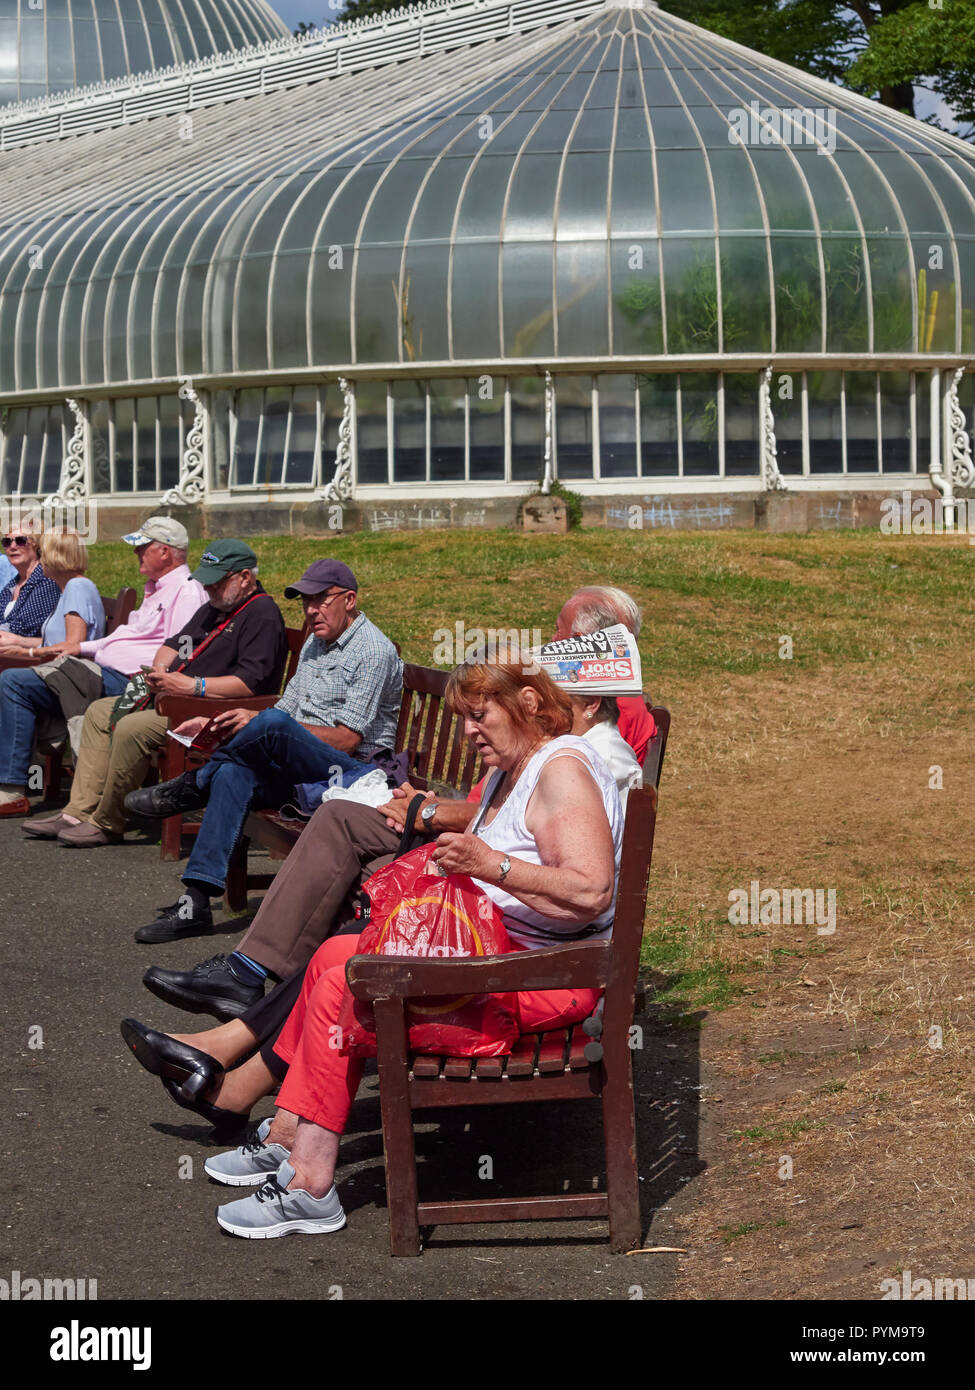 Glaswegians basking in the sun on benches outside in the Glasgow Botanic Gardens Grounds in Central Glasgow, Scotland, UK. Stock Photo